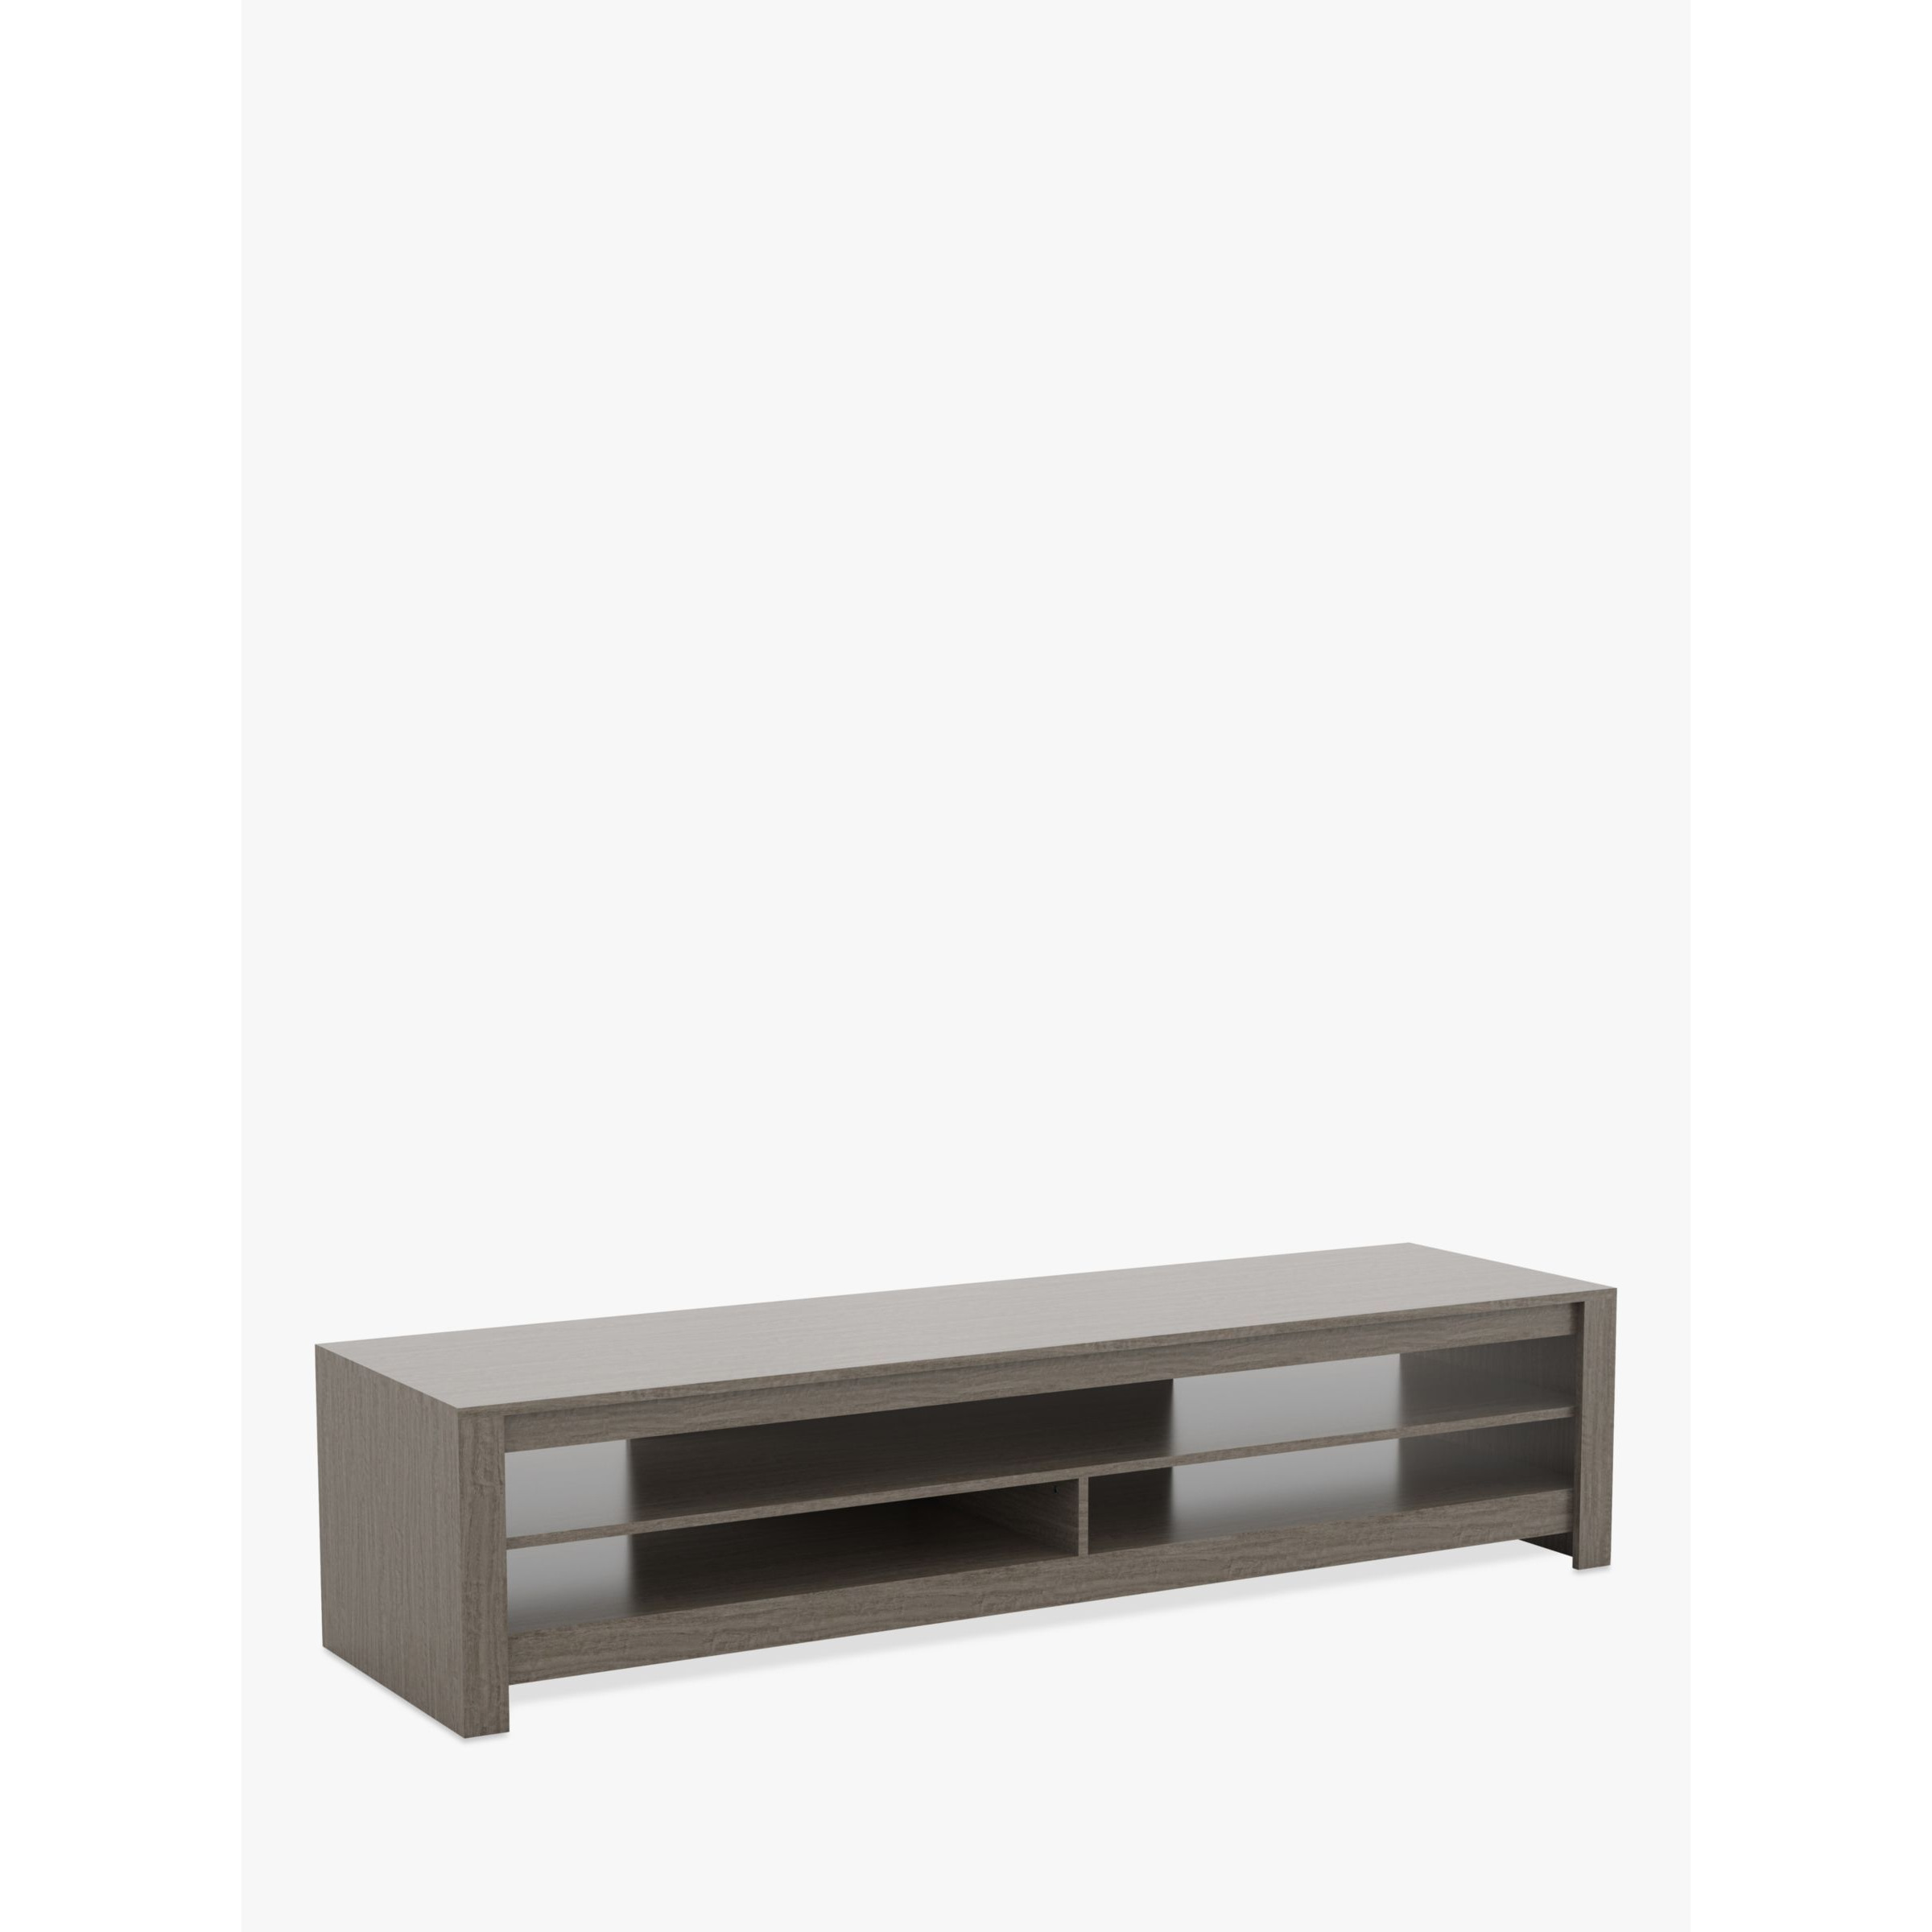 "AVF Calibre 180 TV Stand for TVs up to 85""" - image 1